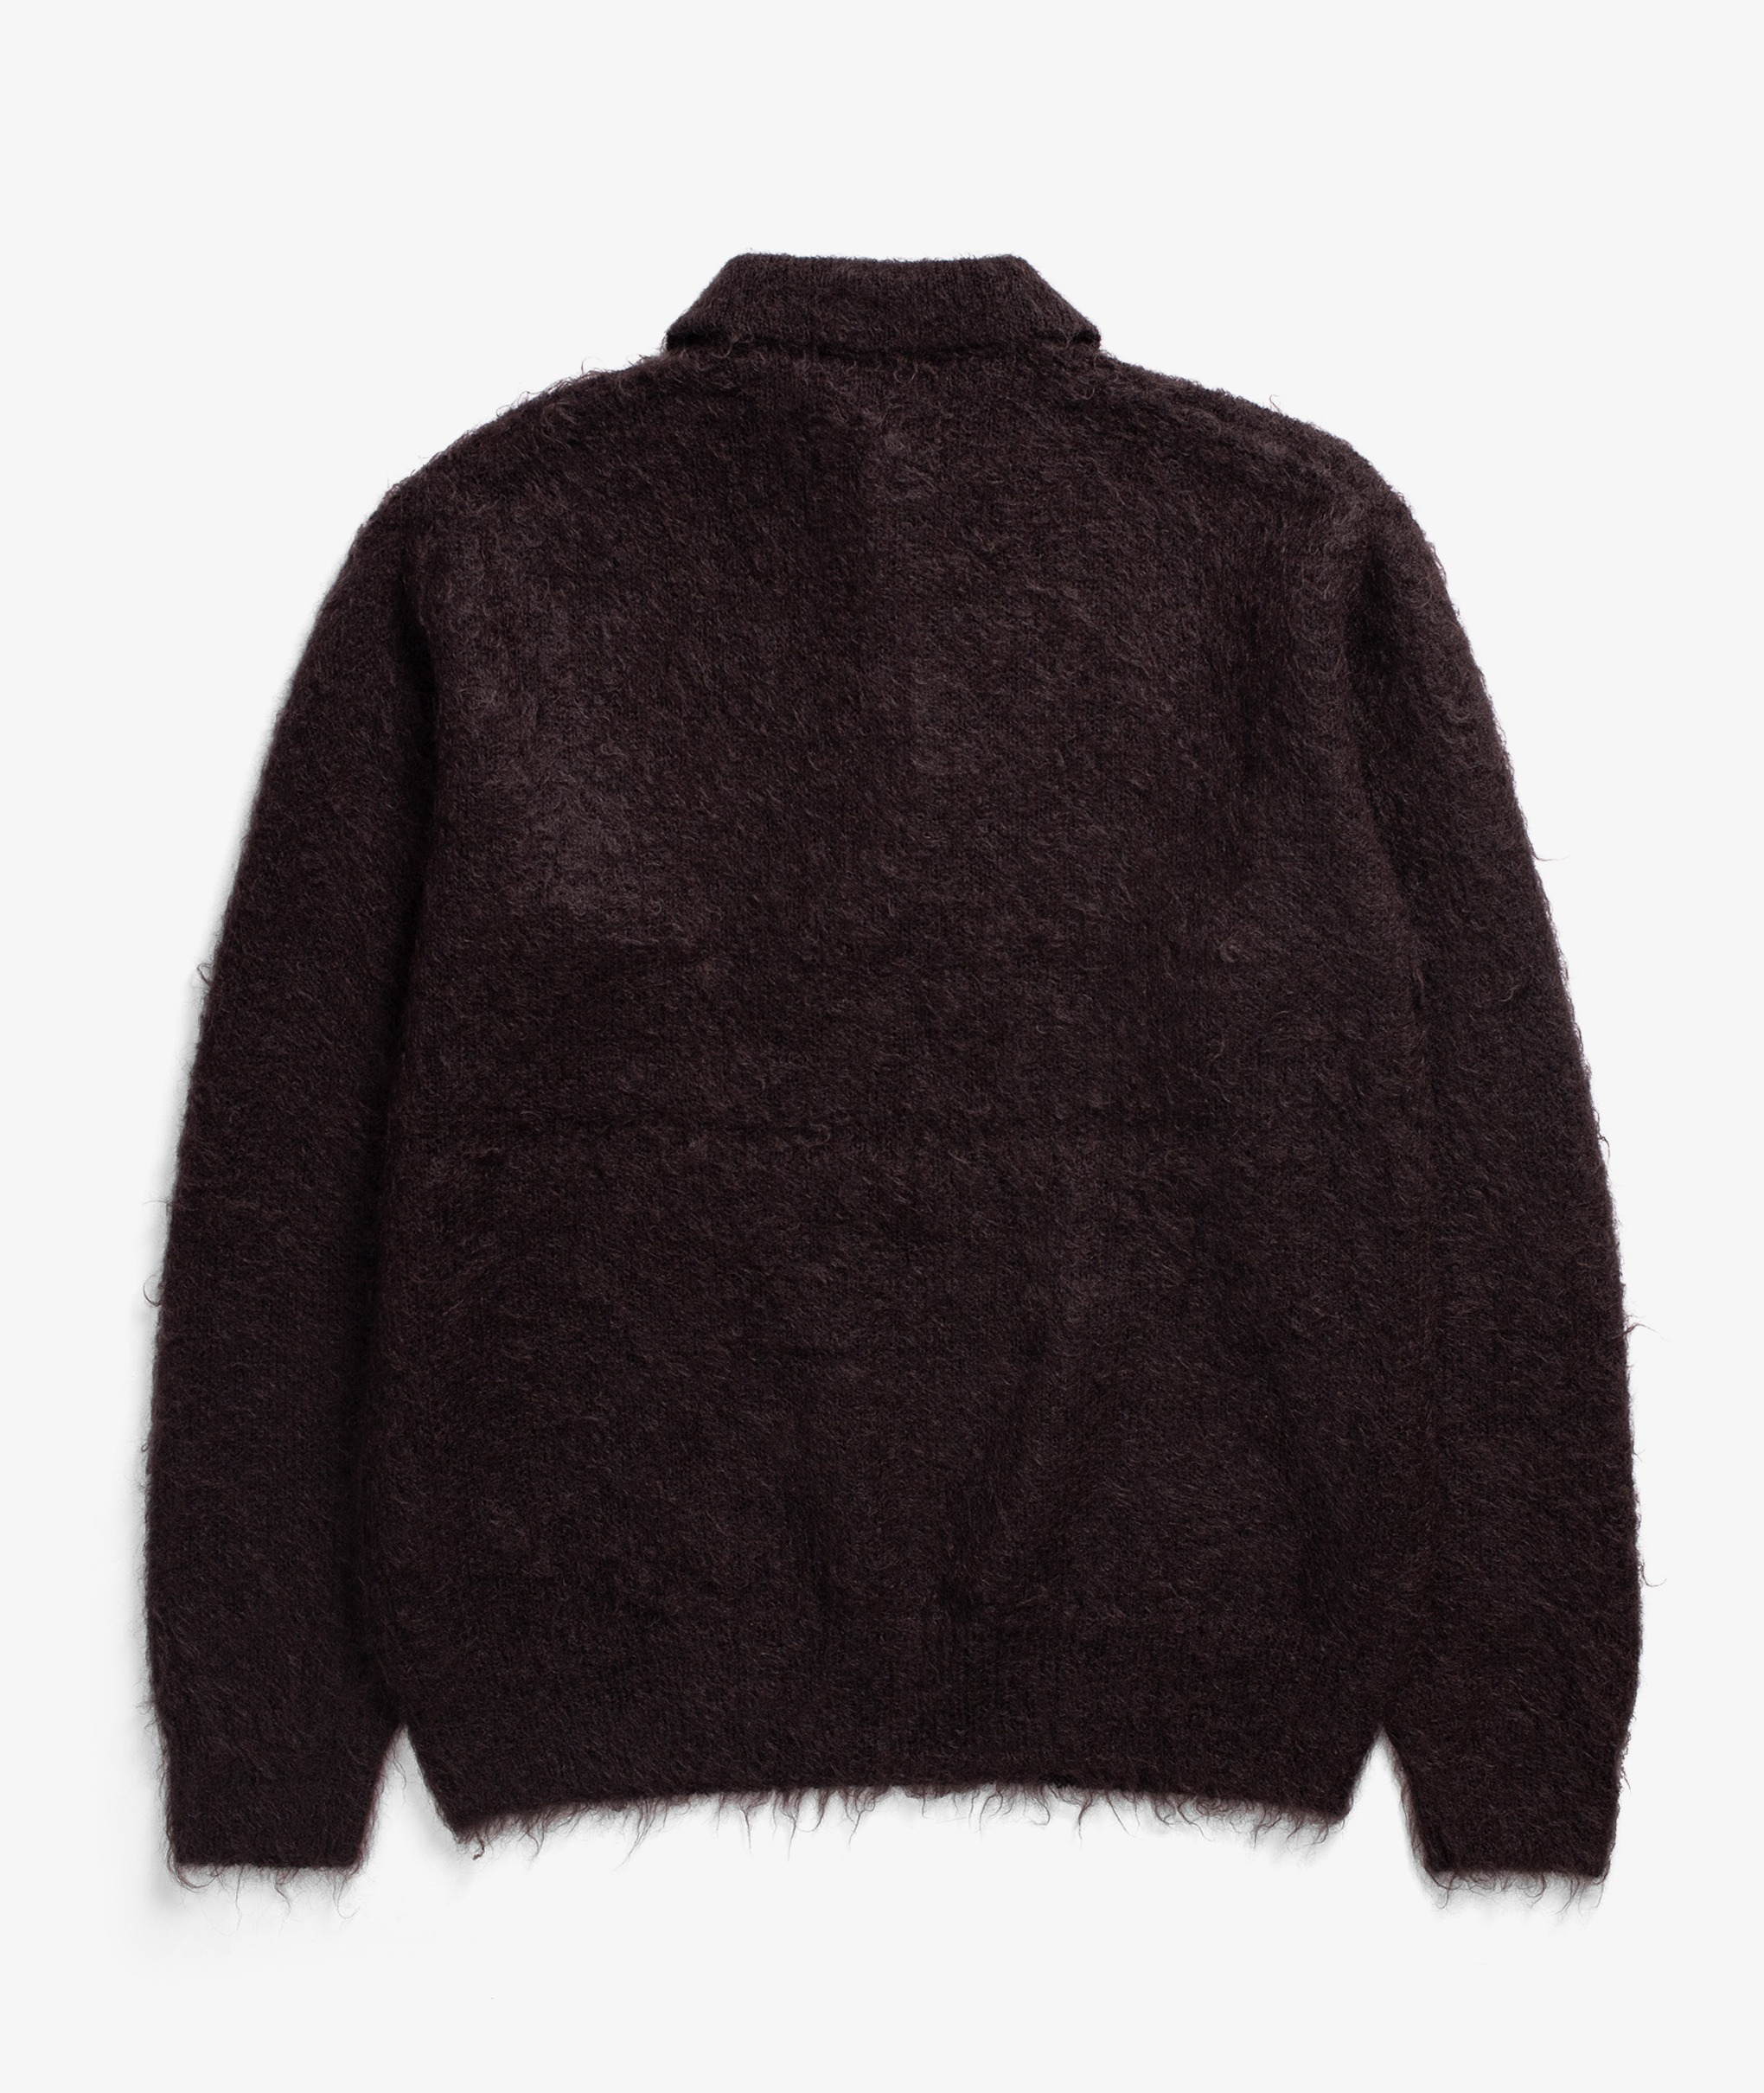 Norse Store | Shipping Worldwide - Auralee BRUSHED SUPER KID